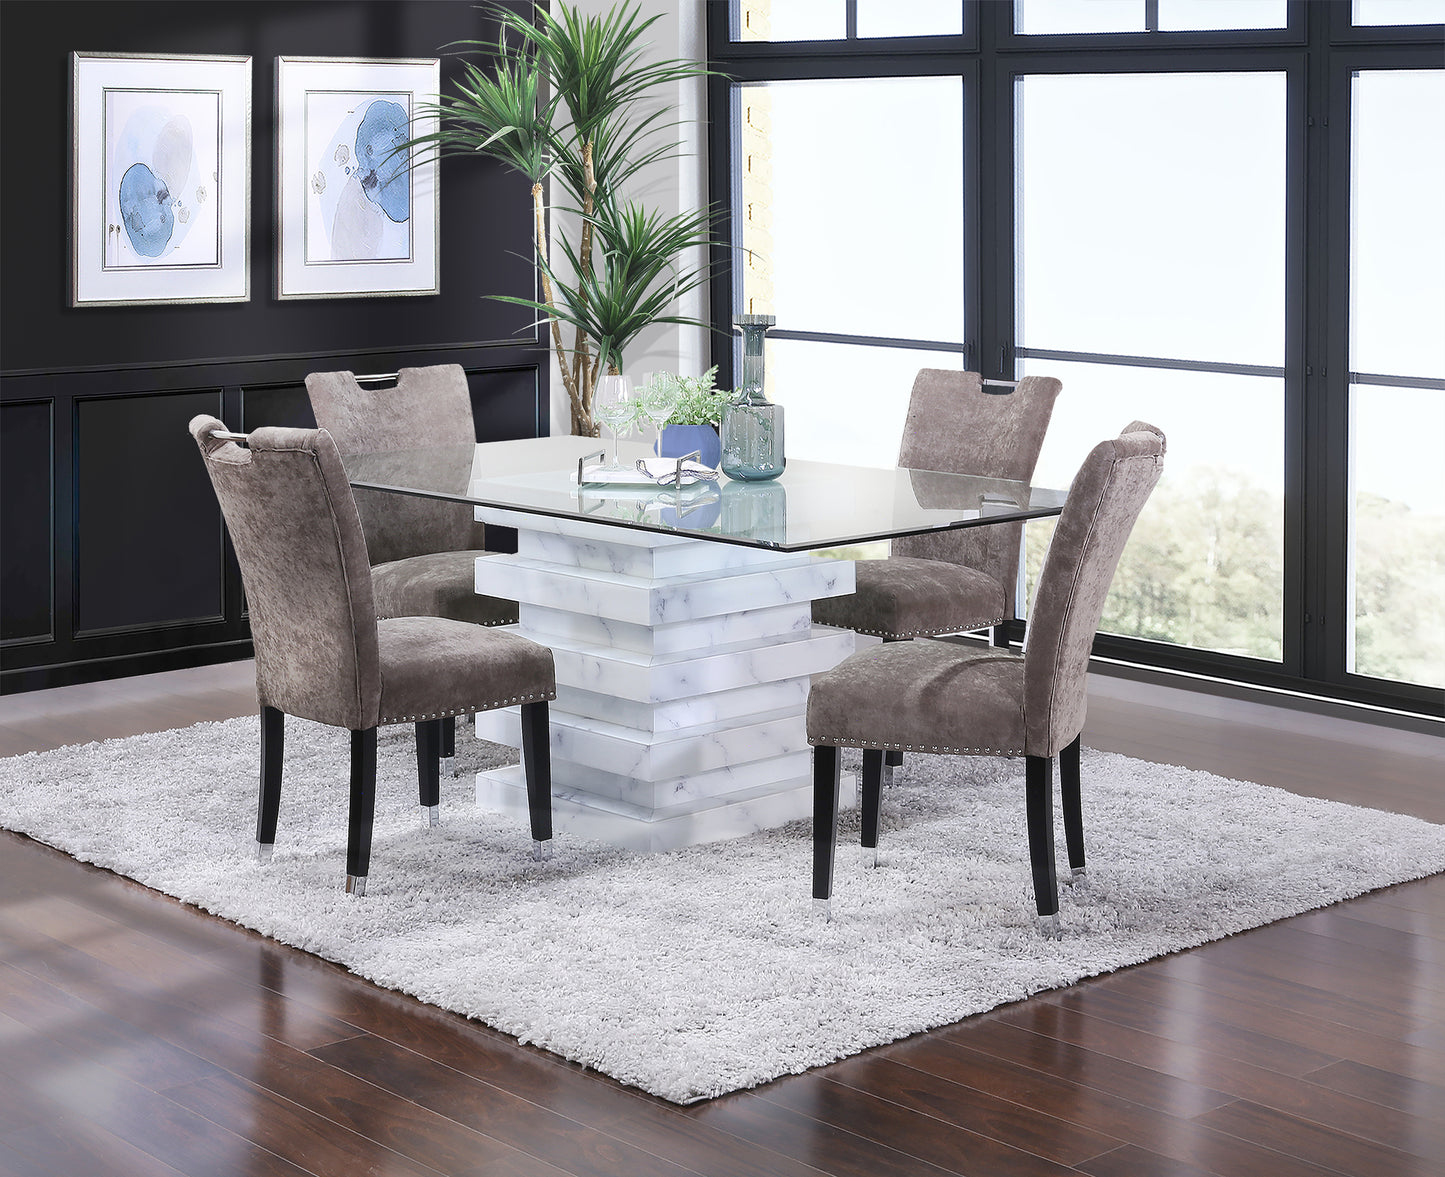 Zayden 5 Piece Dining Set with Grey Chairs